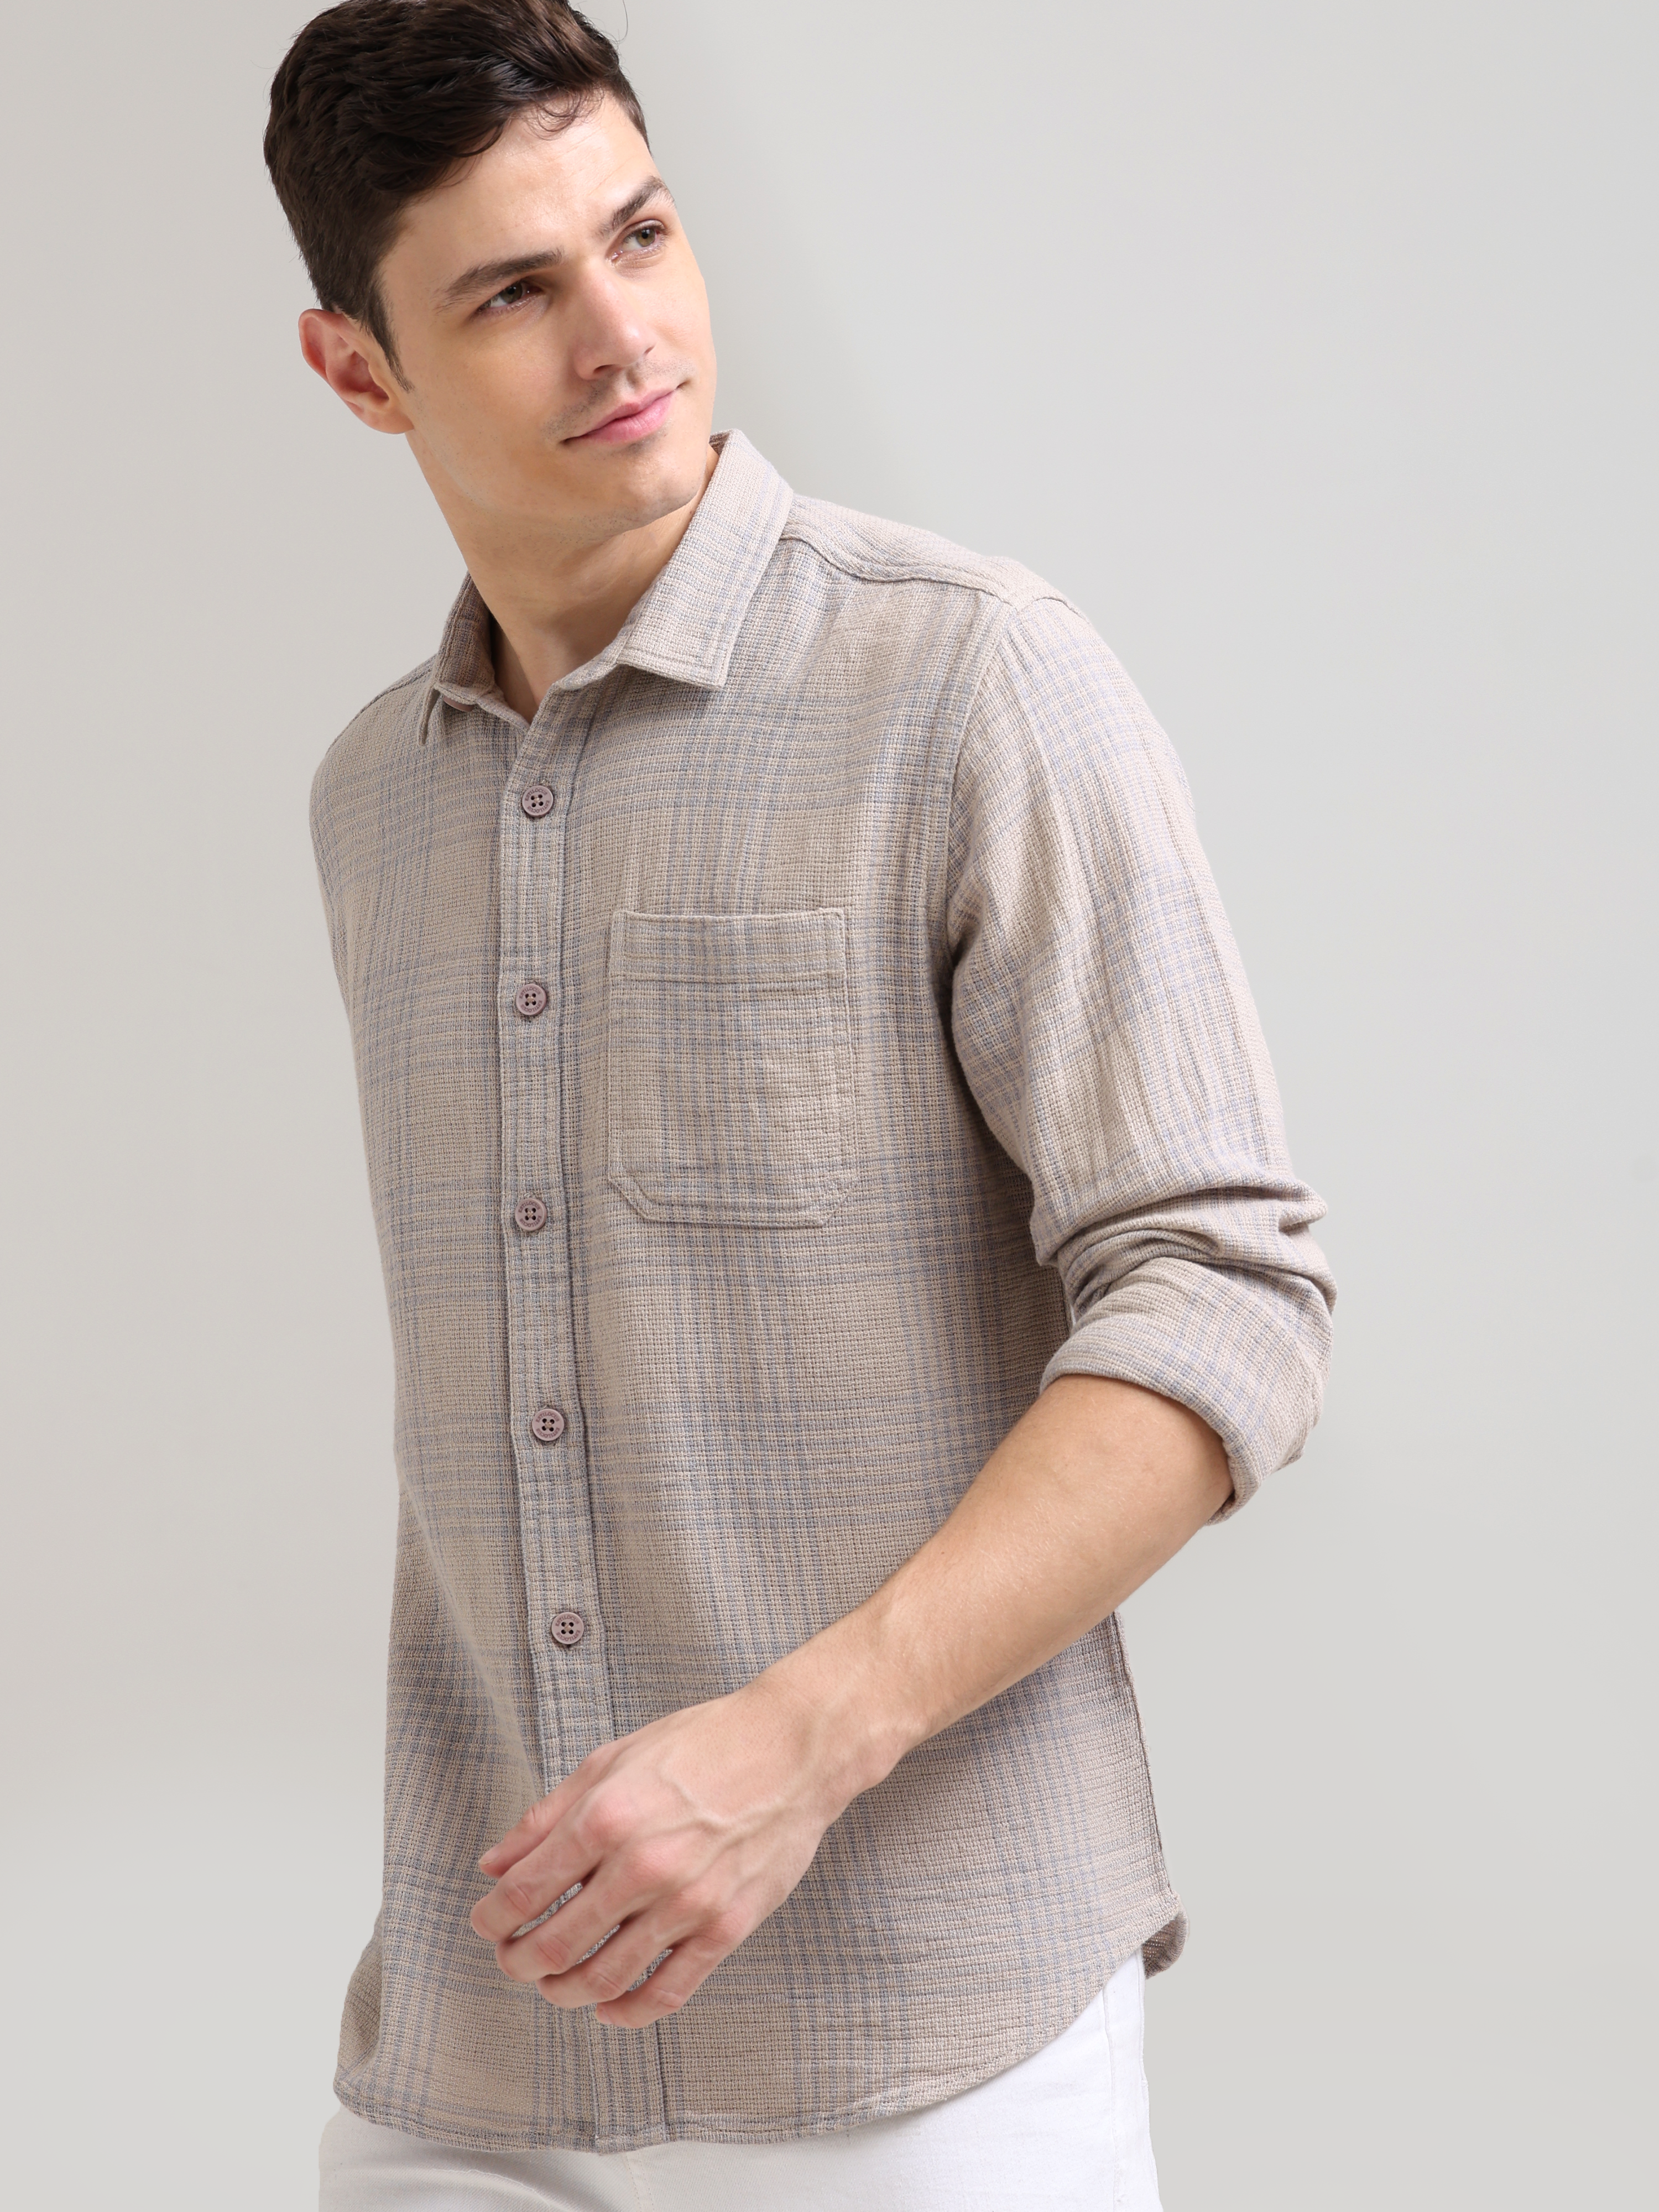 LT coffee off-cream casual check shirt shop online at Estilocus. 100% Cotton • Full-sleeve check shirt• Cut and sew placket• Regular collar• Double button edge cuff• Single pocket • Curved bottom hemline .• All double needle construction, finest quality s